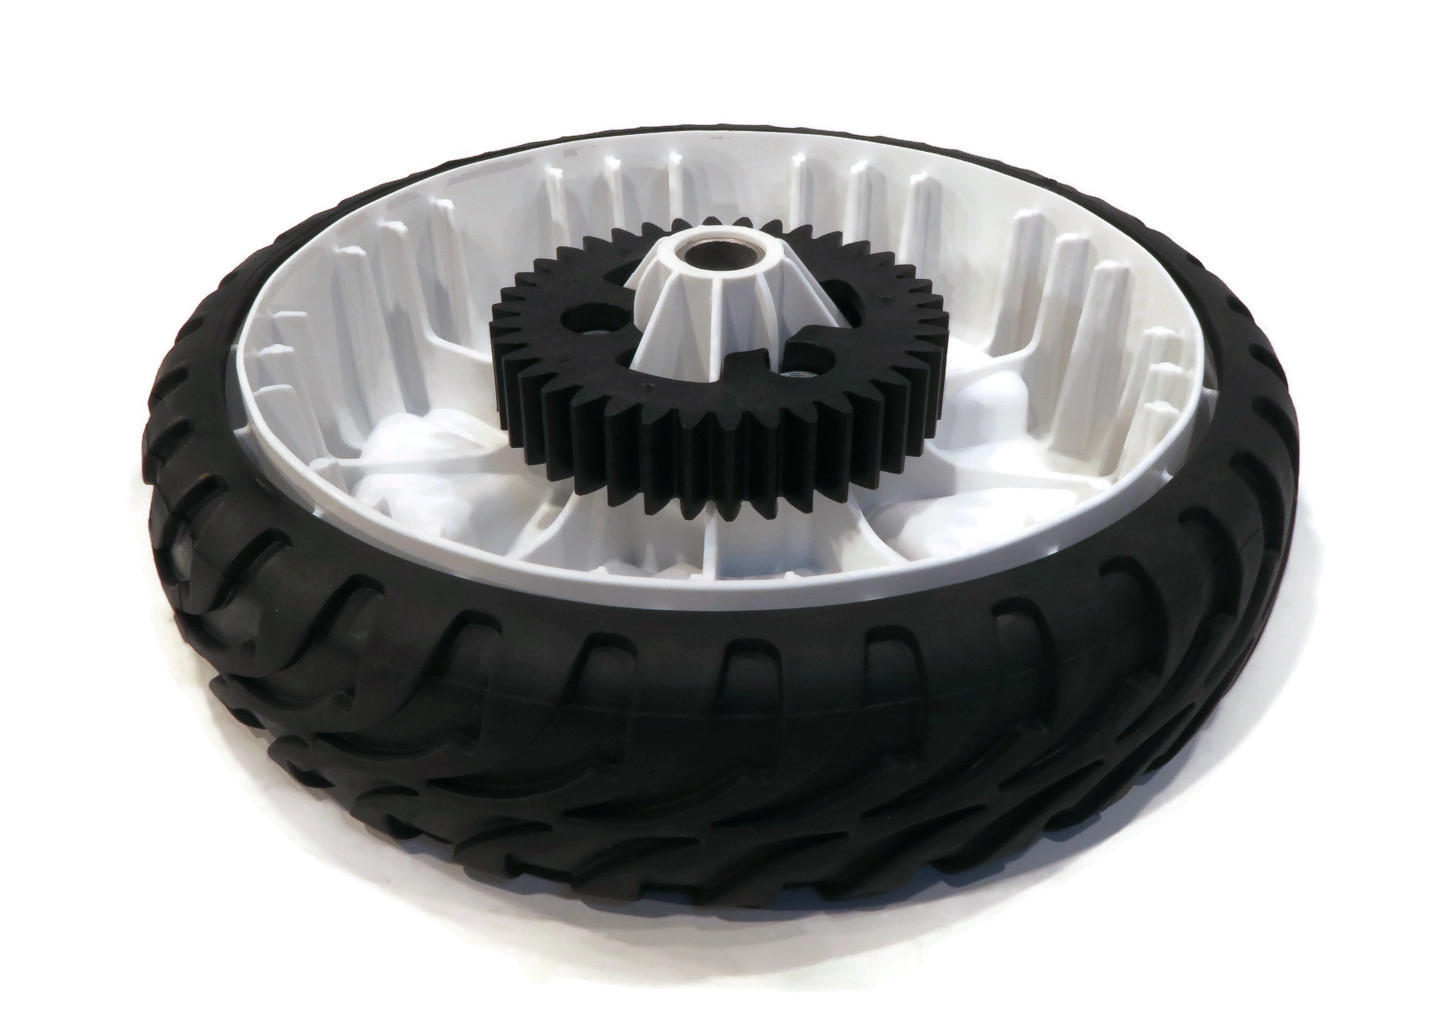 The ROP Shop | TORO OEM 8" Wheel Gear Assembly 138-3216 For RWD Push LawnMower Lawn Mower - image 5 of 7